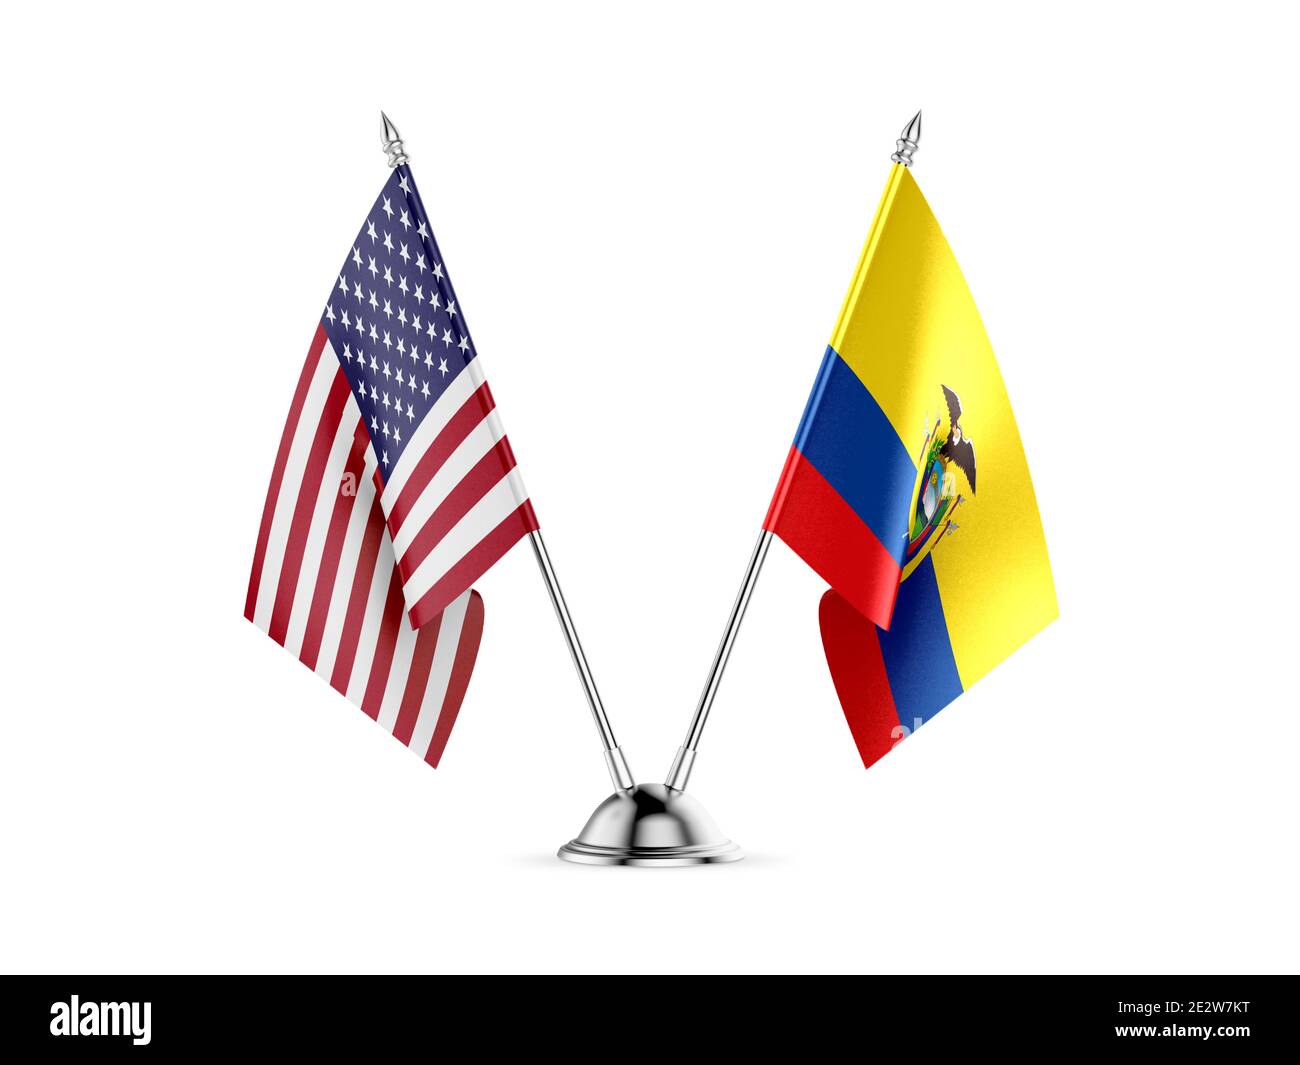 Desk flags, United States  America  and Ecuador, isolated on white background. 3d image Stock Photo